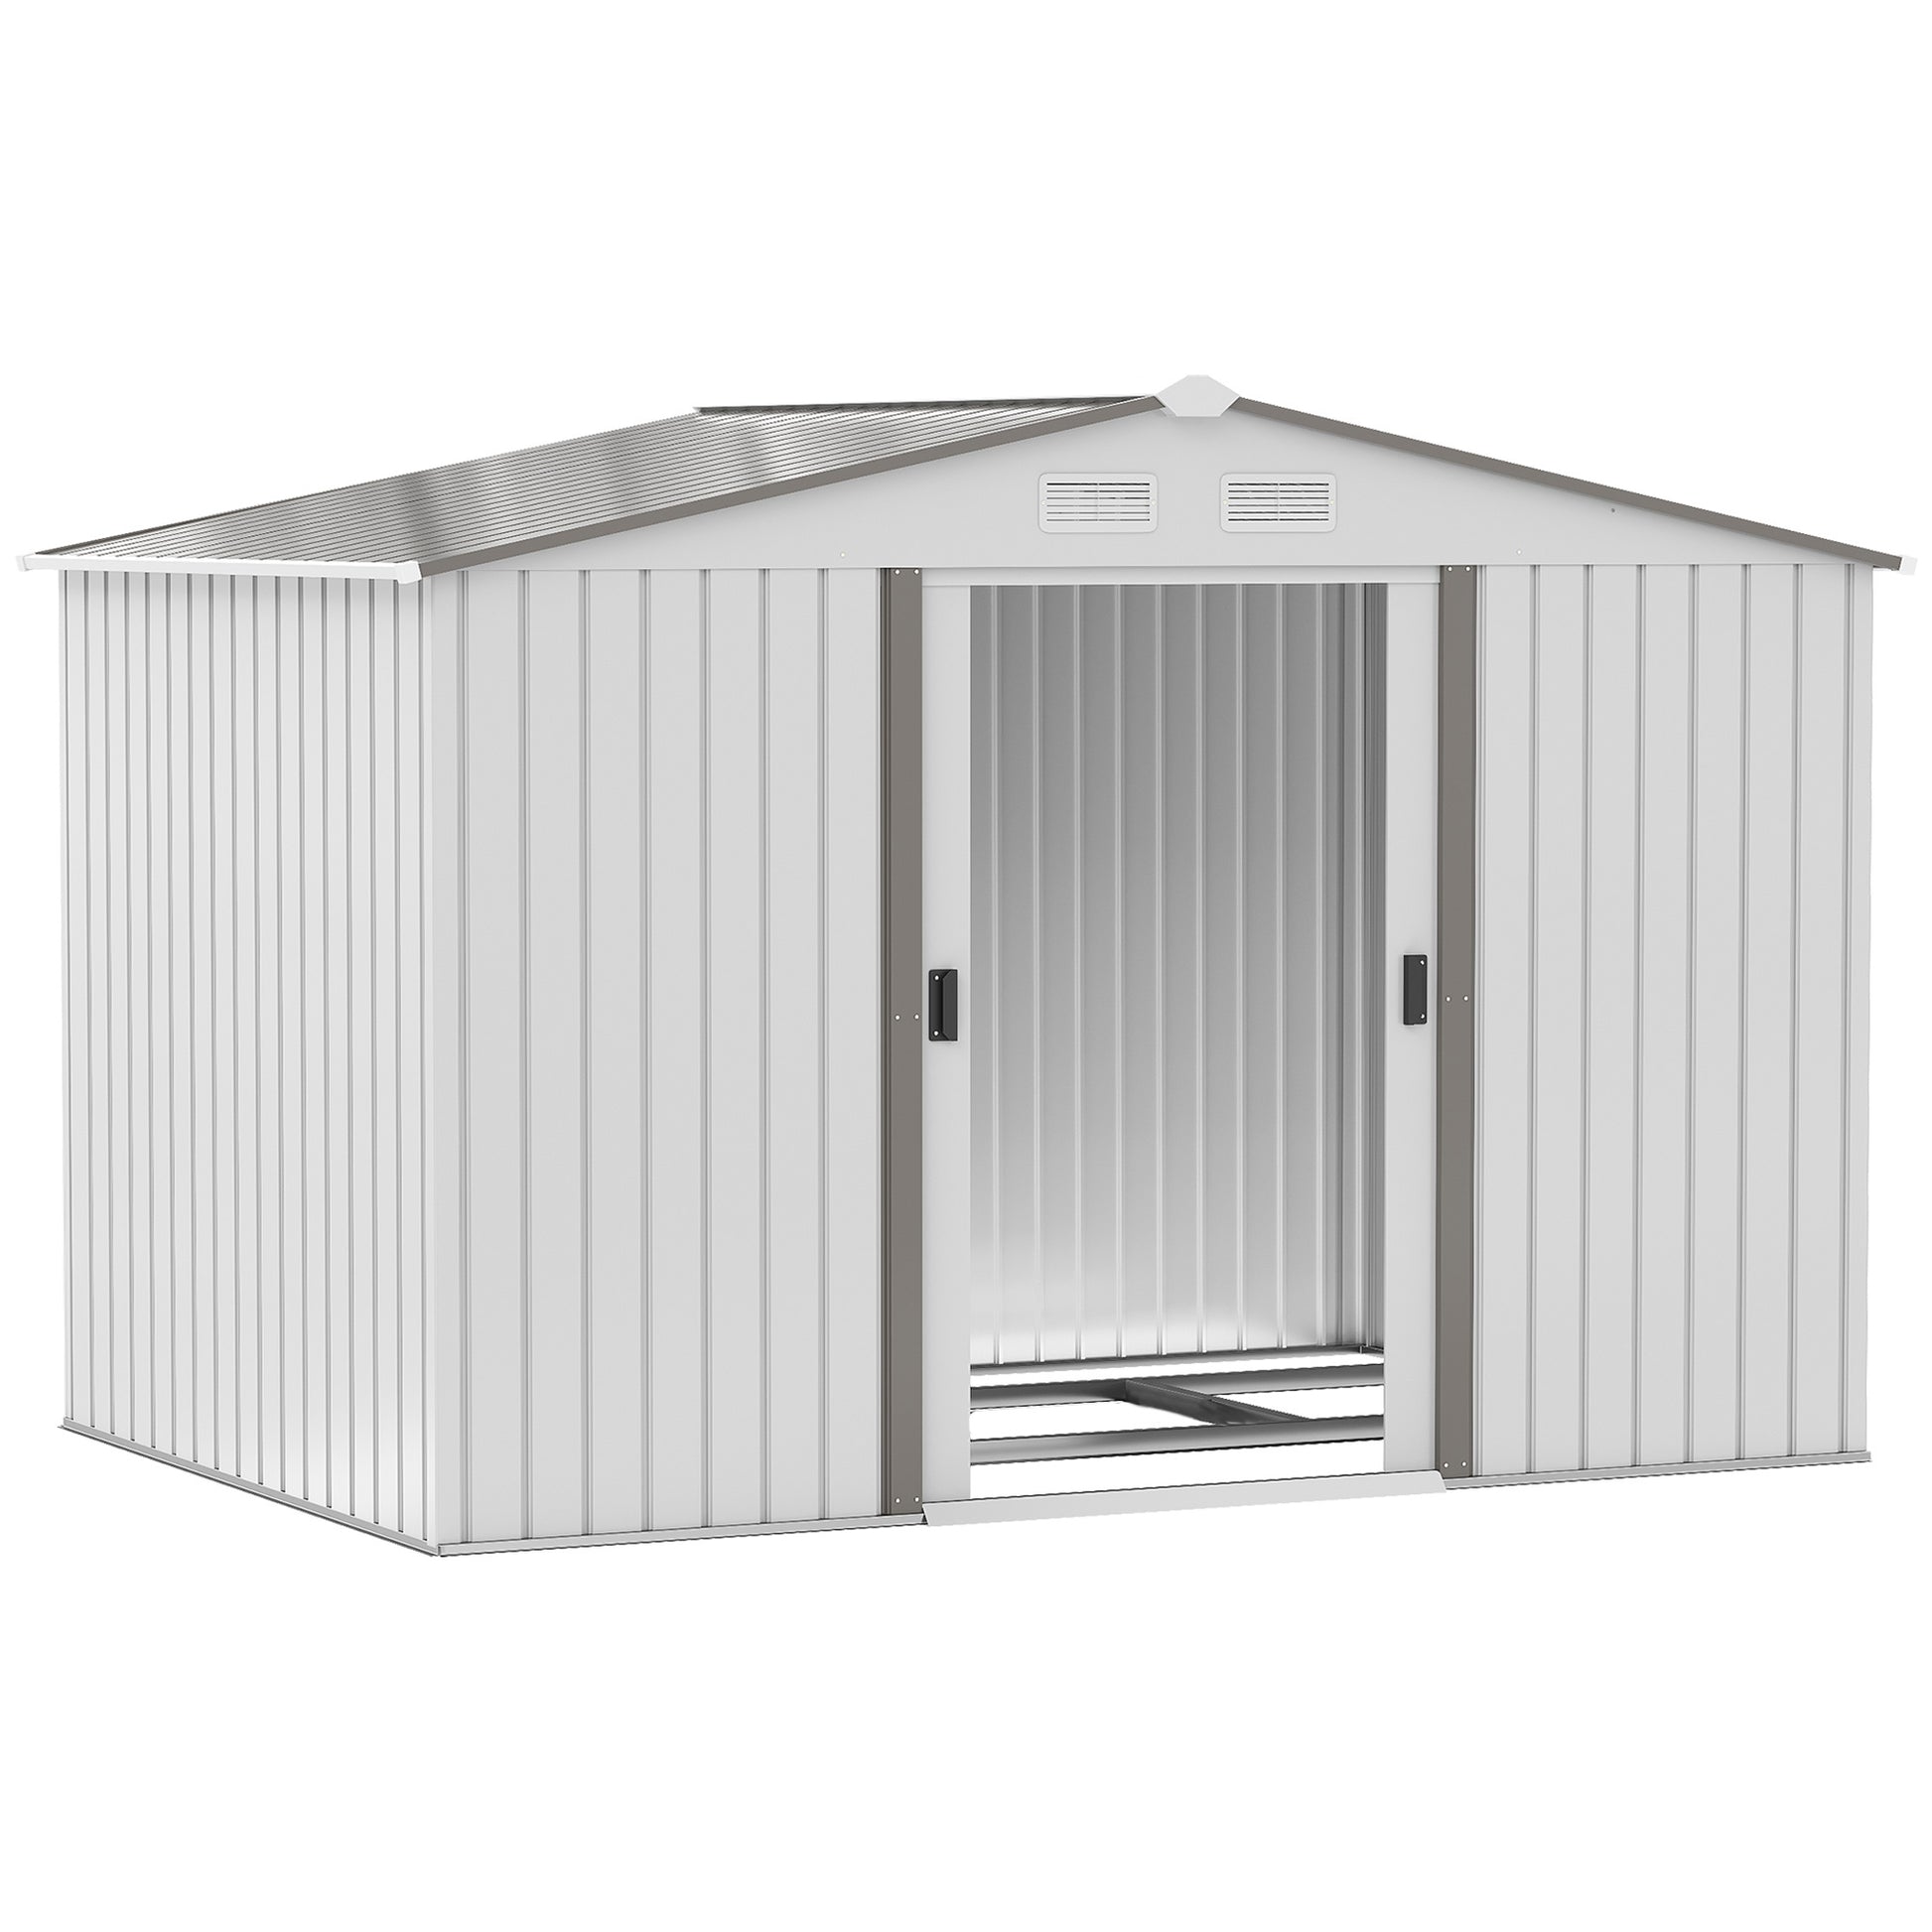 Outsunny 9 x 6FT Garden Storage Shed, Metal Outdoor Storage Shed House with Floor Foundation, Ventilation & Doors, Grey - OutdoorBox